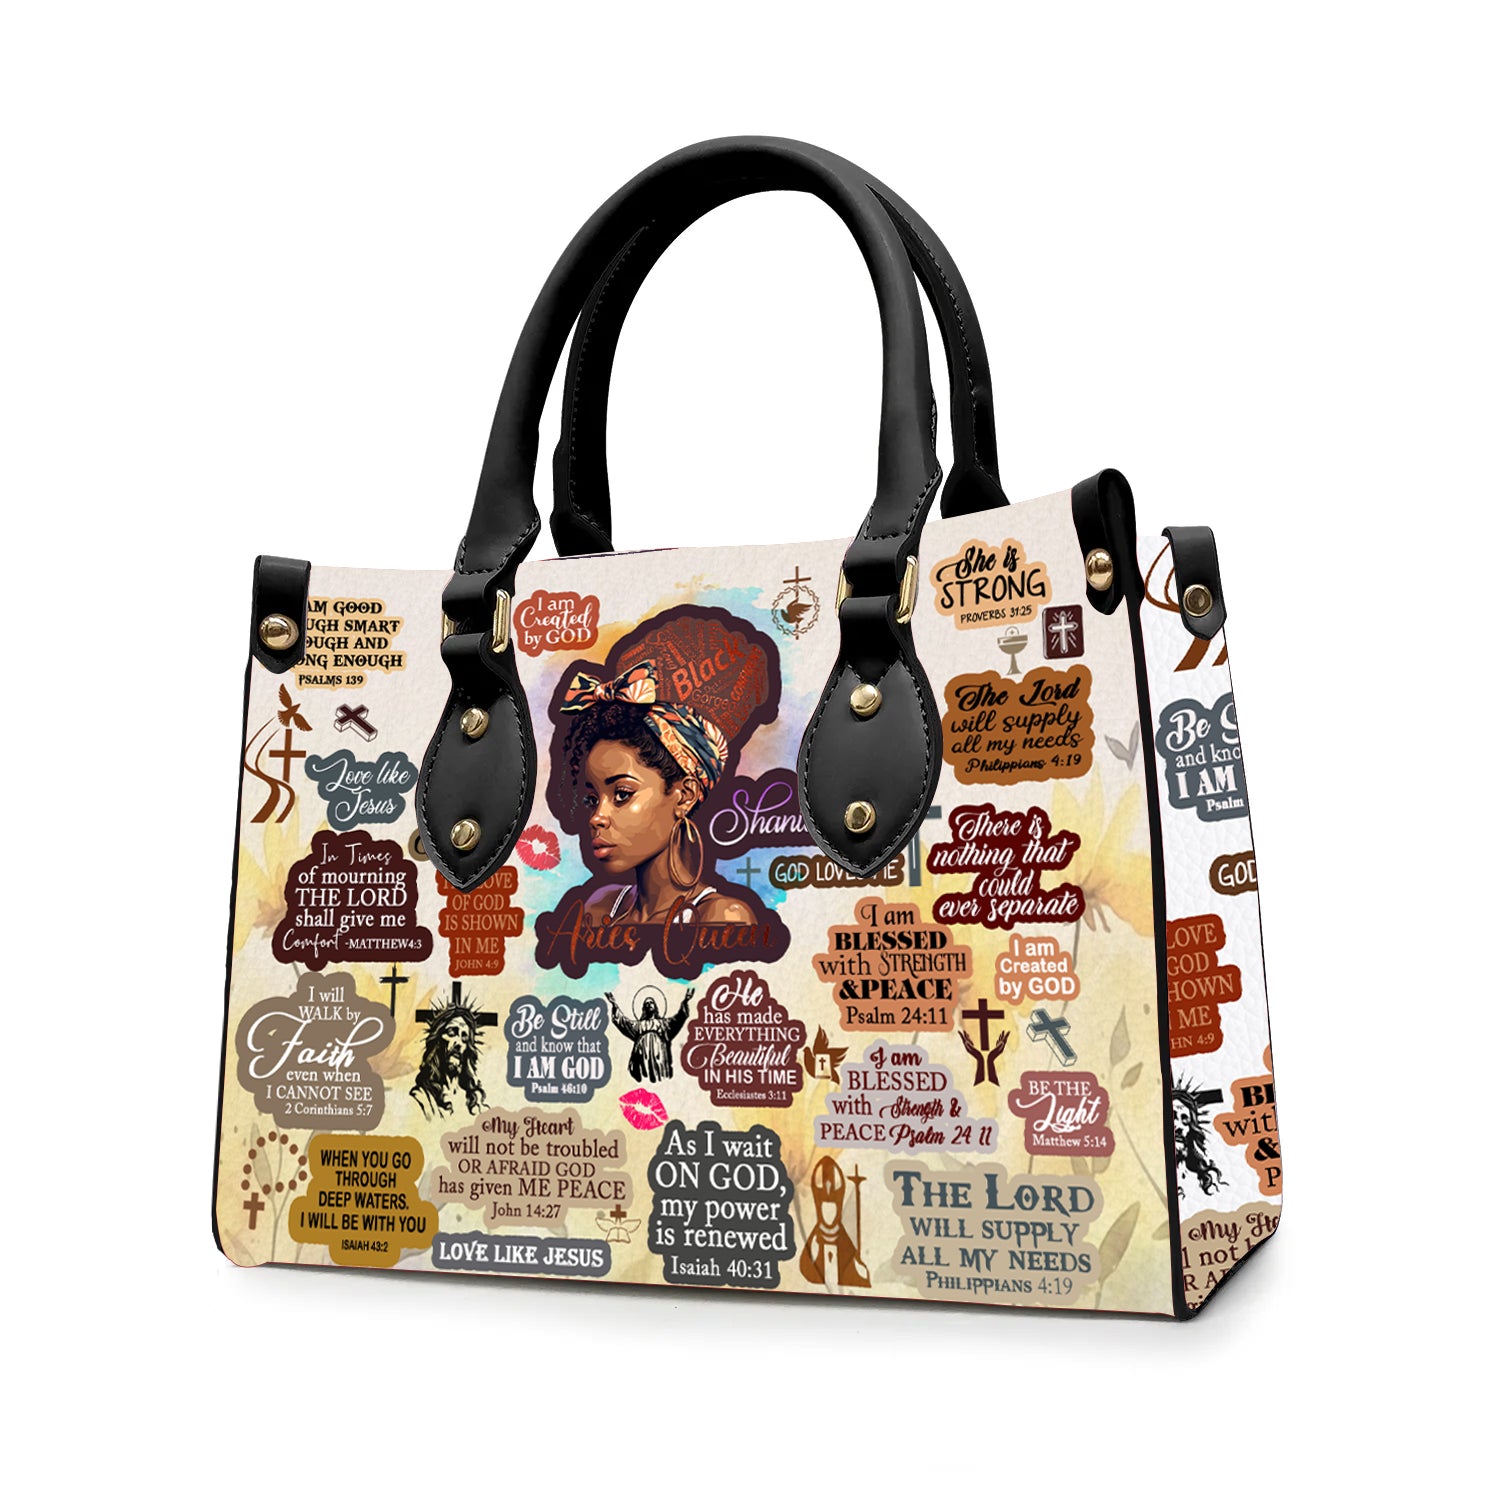 Christianartbag Handbags, Personalized Designs with Women of Color, Bible Verses, and Zodiac Signs – Add Your Name for a Unique Touch, Handbag Design, Black Women Leather Handbag, Gifts for Women, CABLTB01191223. - Christian Art Bag